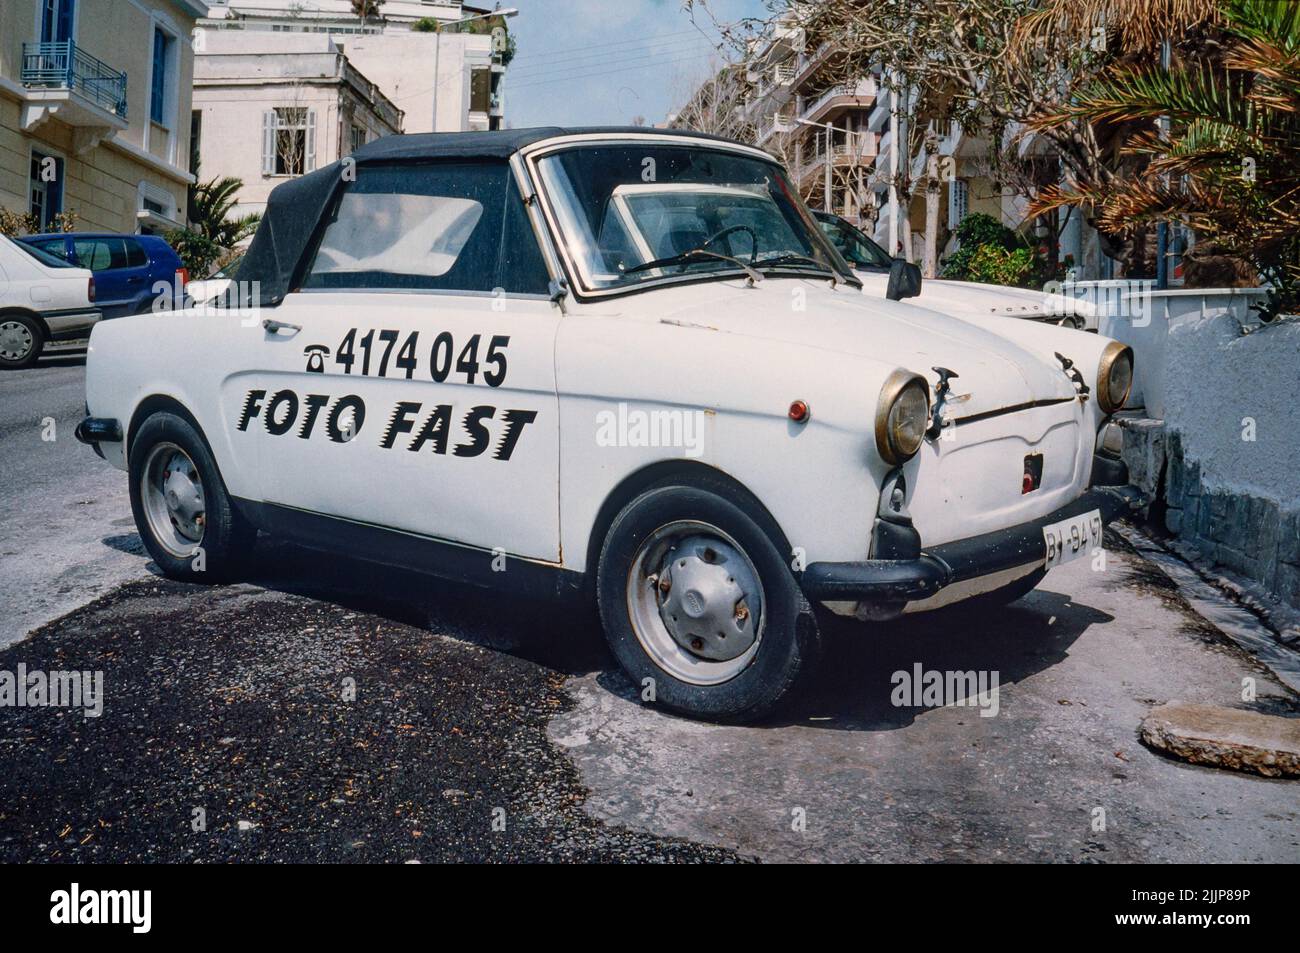 A view of the NSU compact car with letters 'Foto fast' Stock Photo